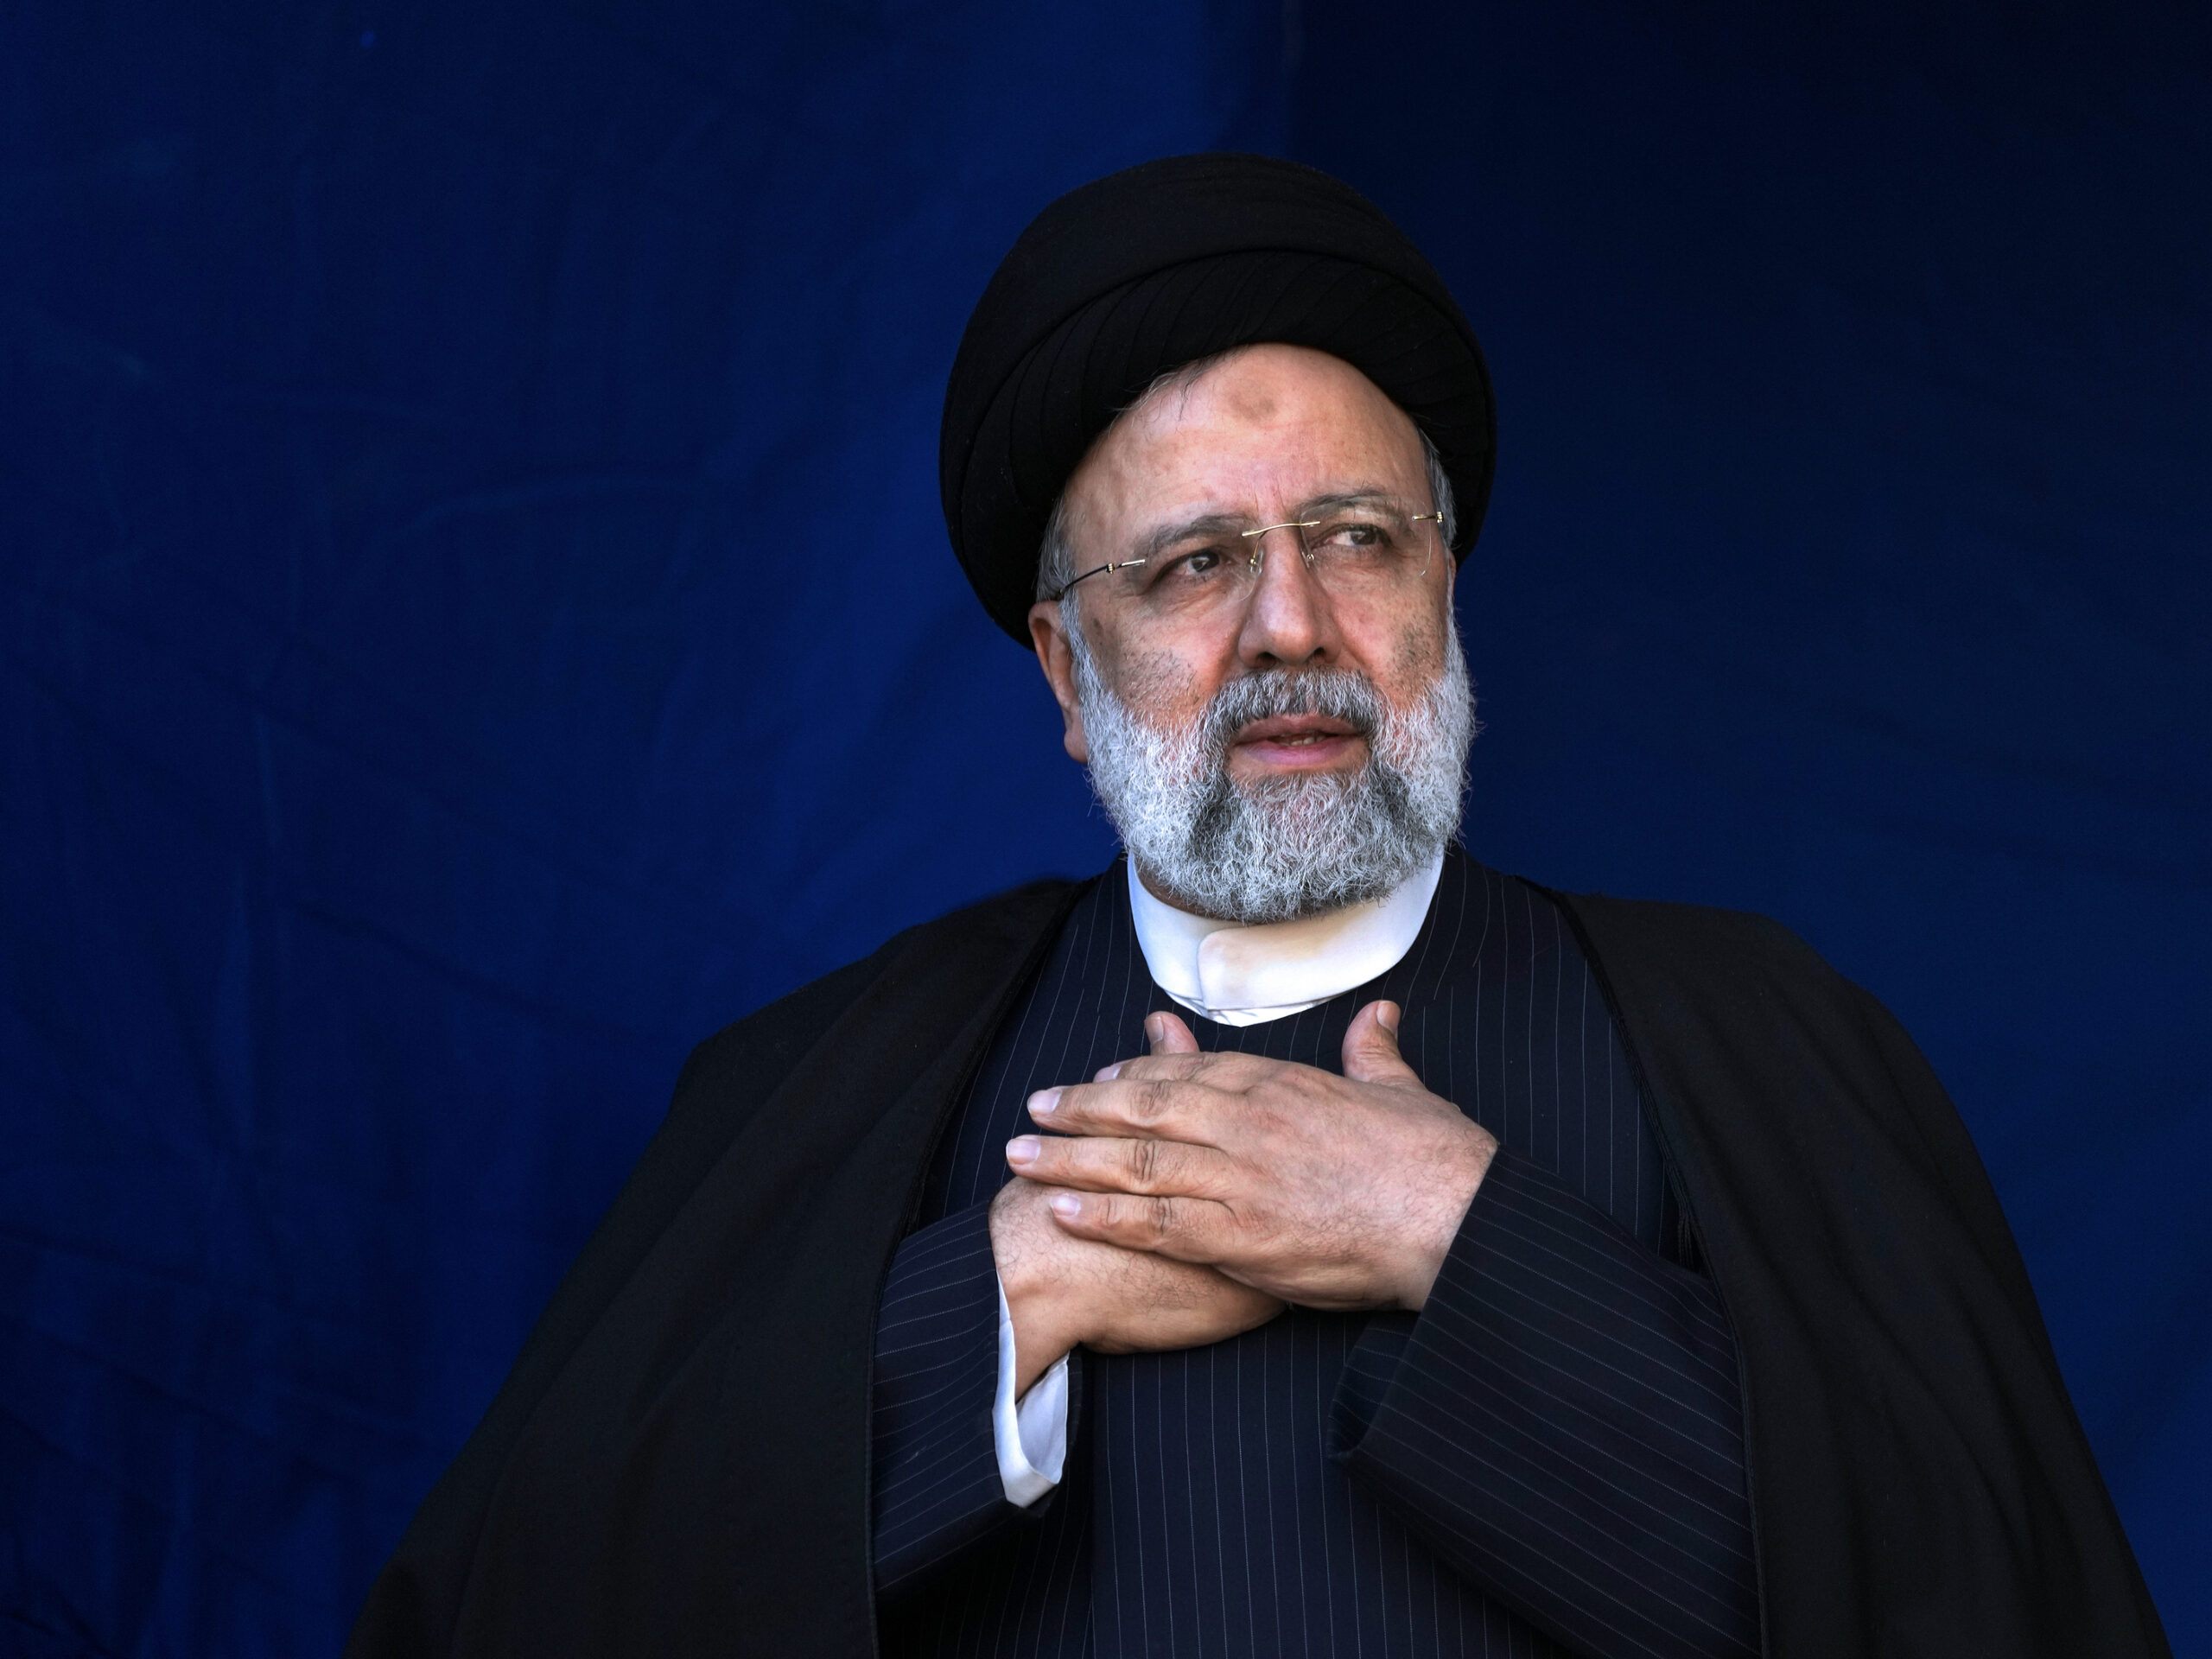 Iran’s president has died in a helicopter crash, state media reports